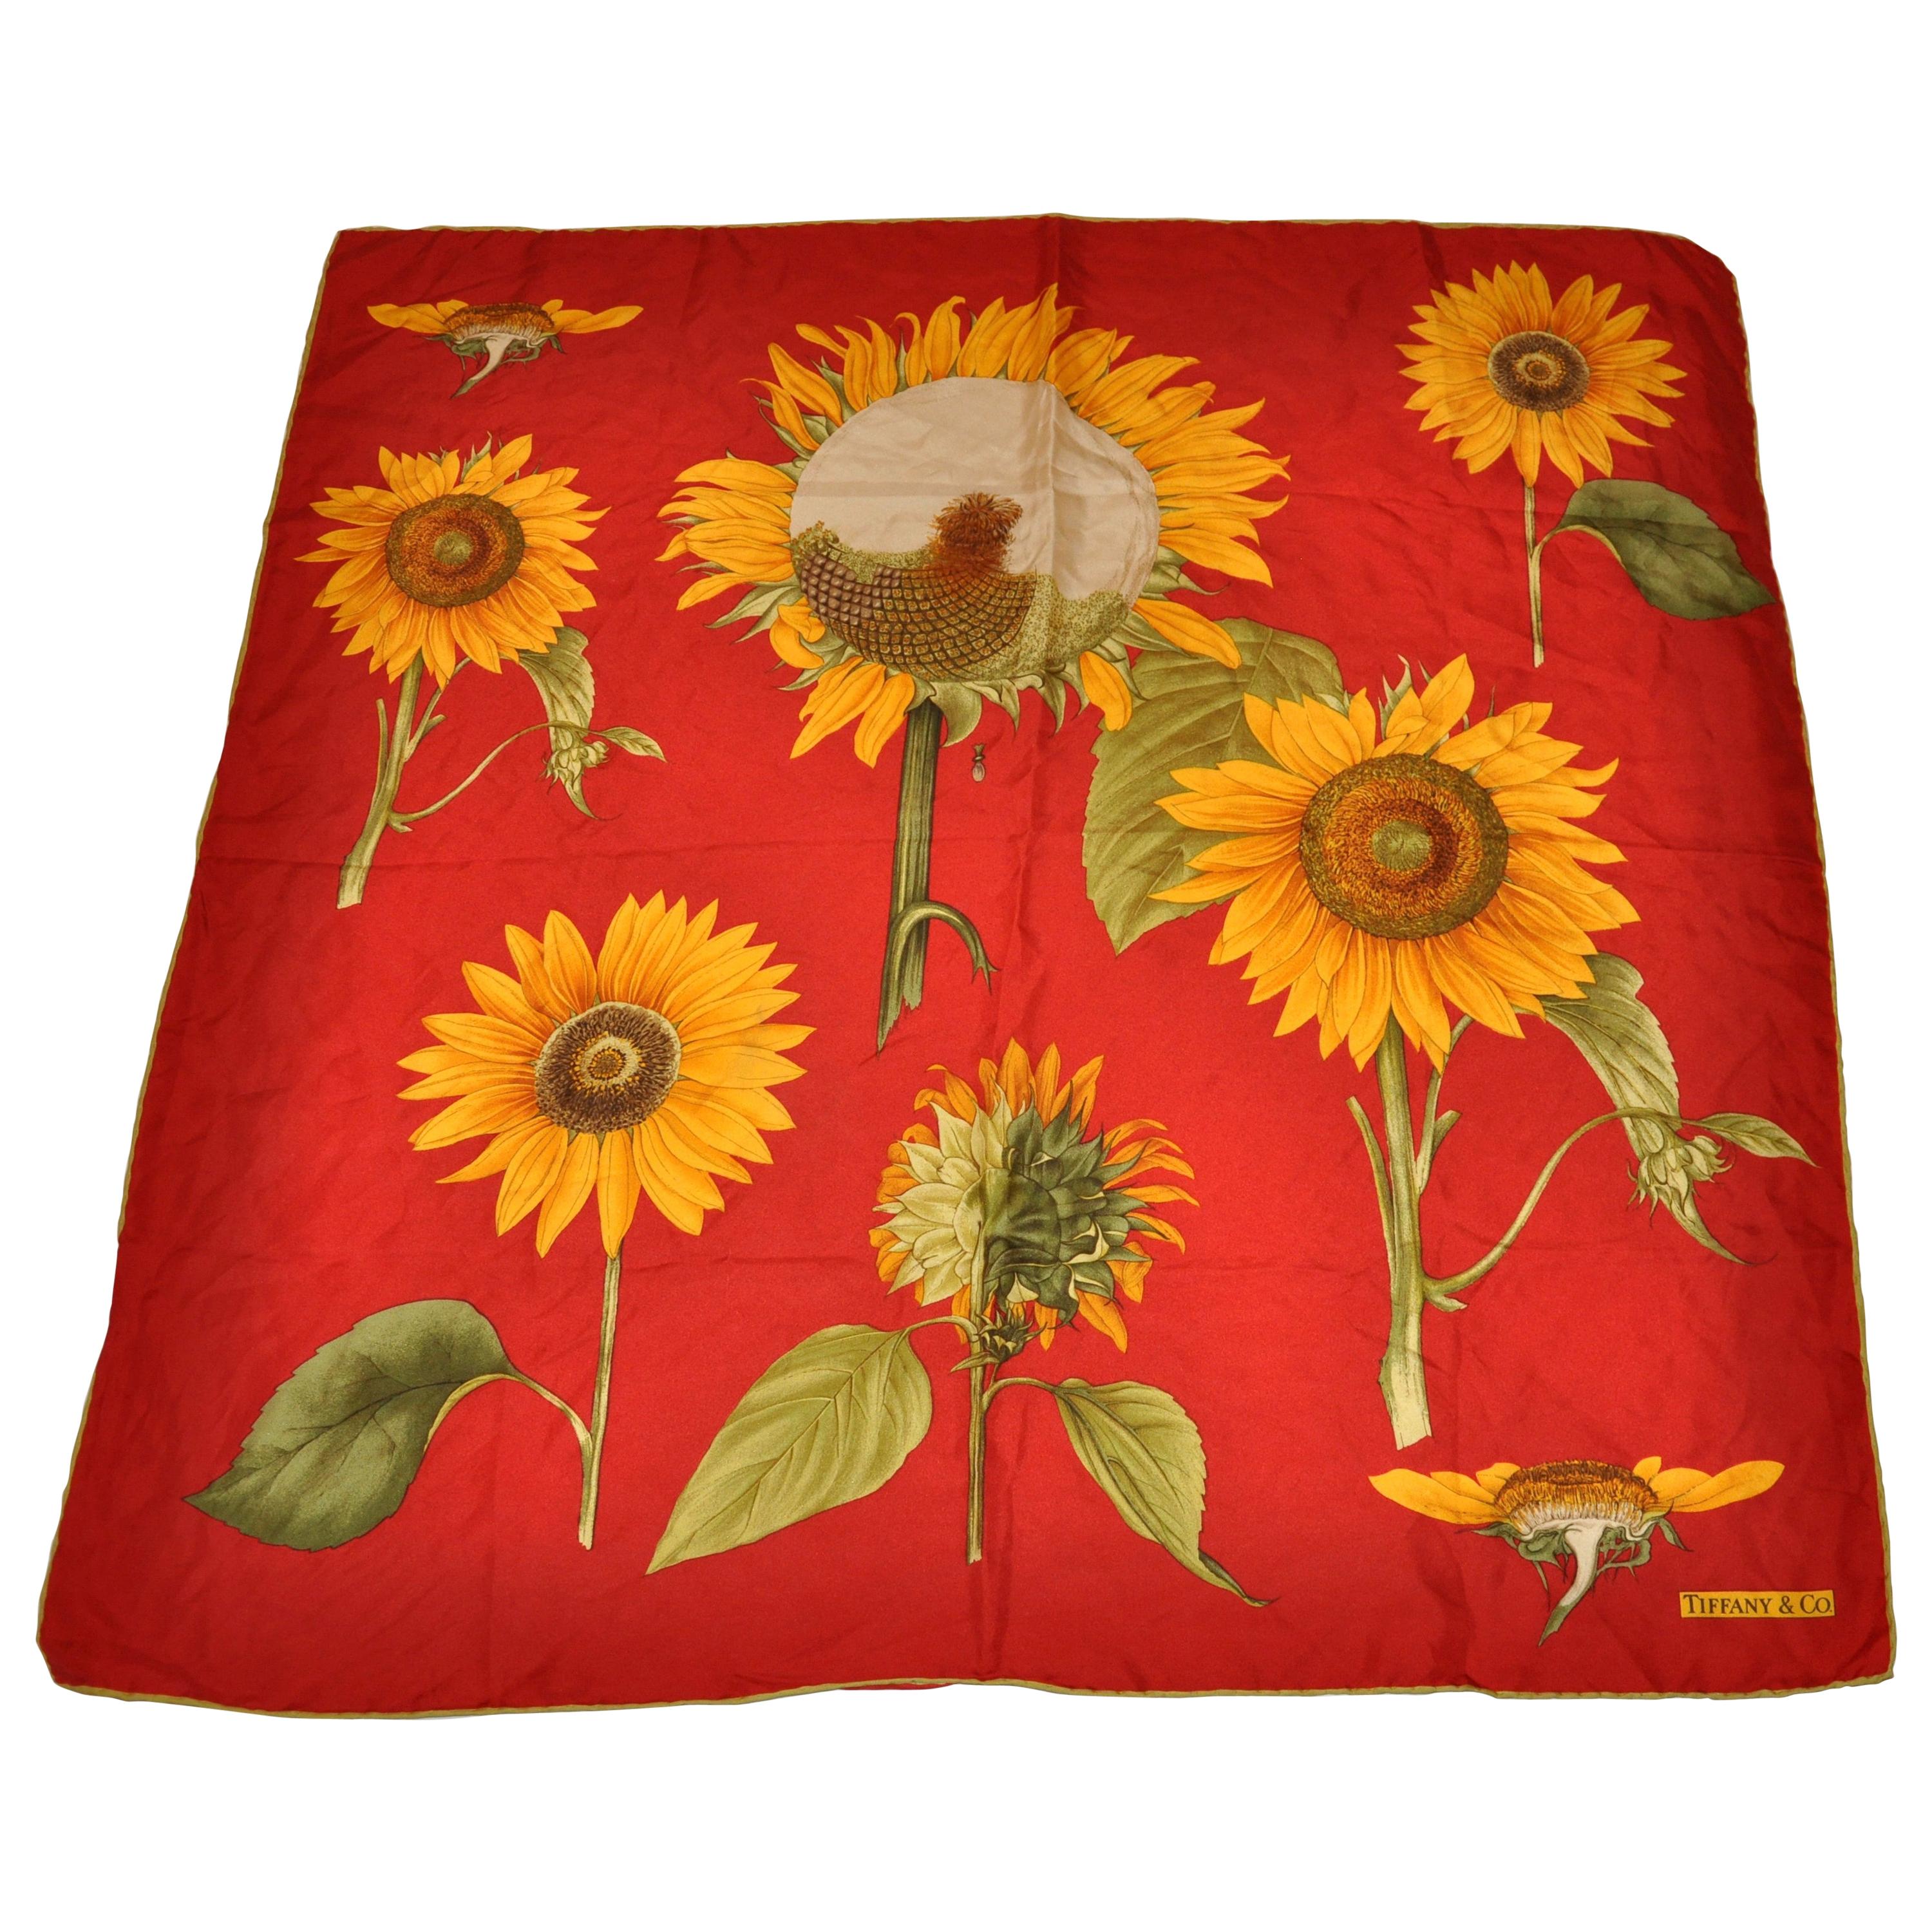 Tiffany & Co. Vividly Colorful "Blooming Sunflowers" Silk Scarf.